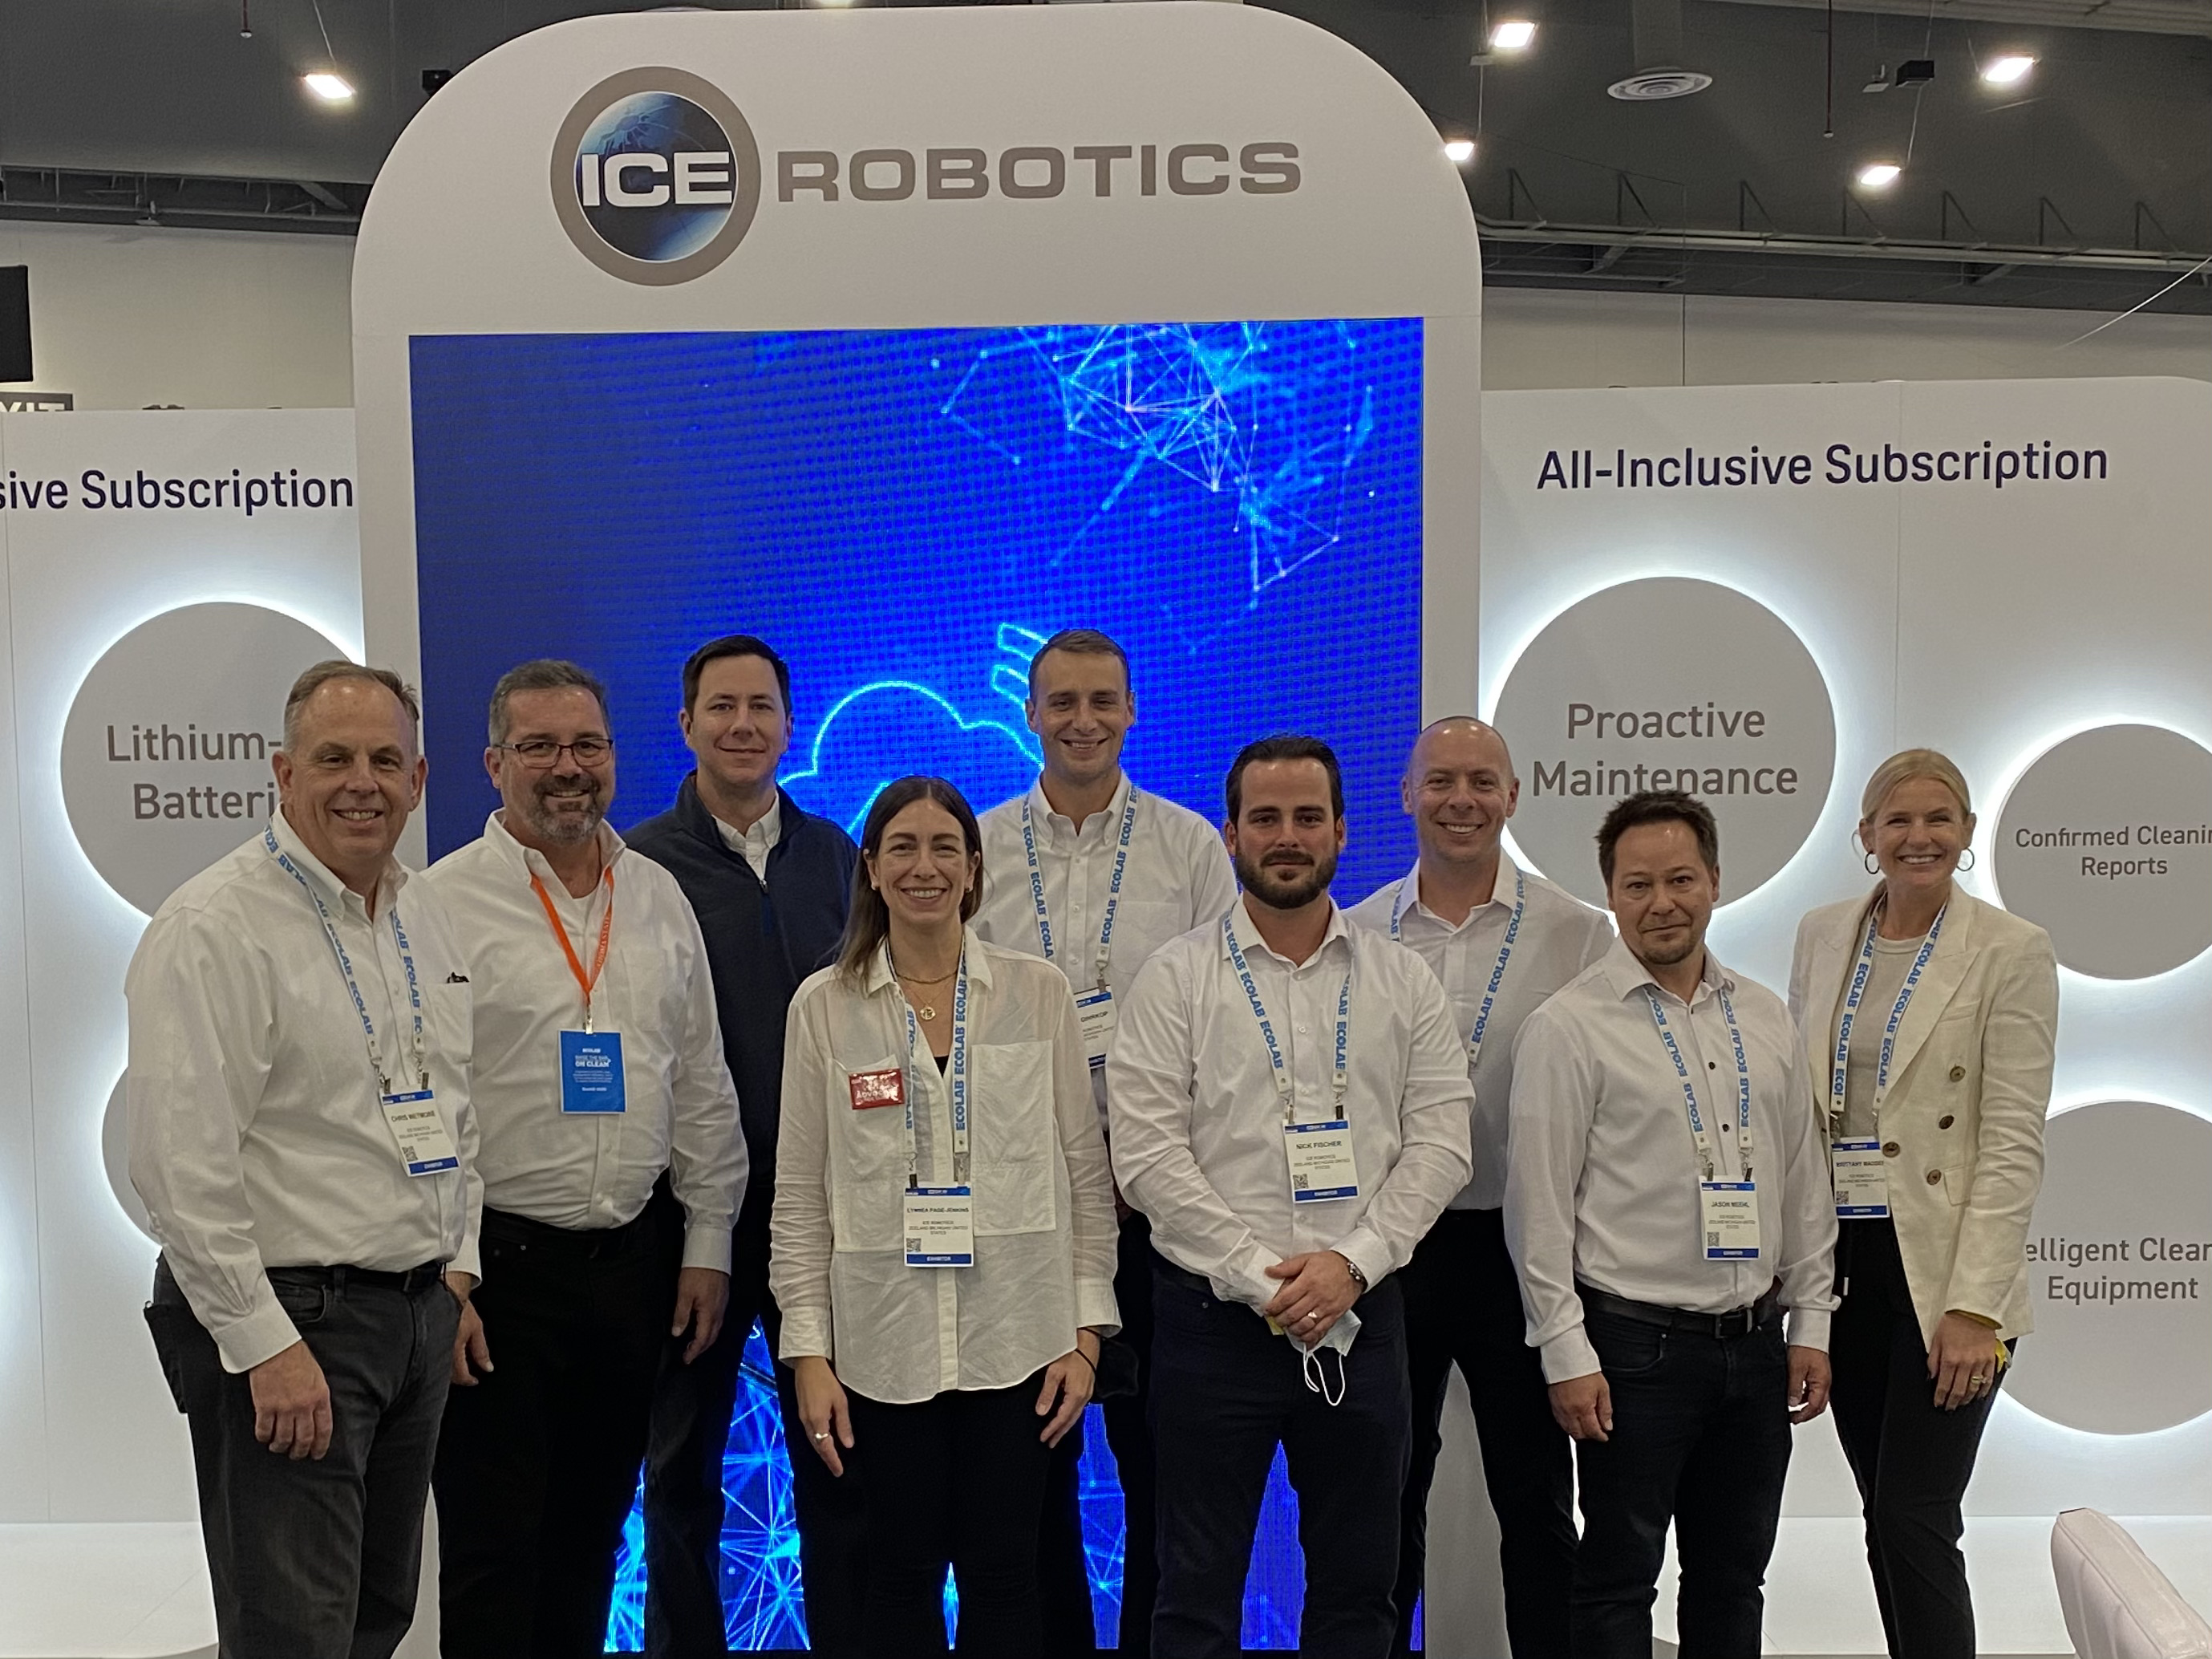 picture of the the ICE Cobotics booth team standing in front of tall blue screen